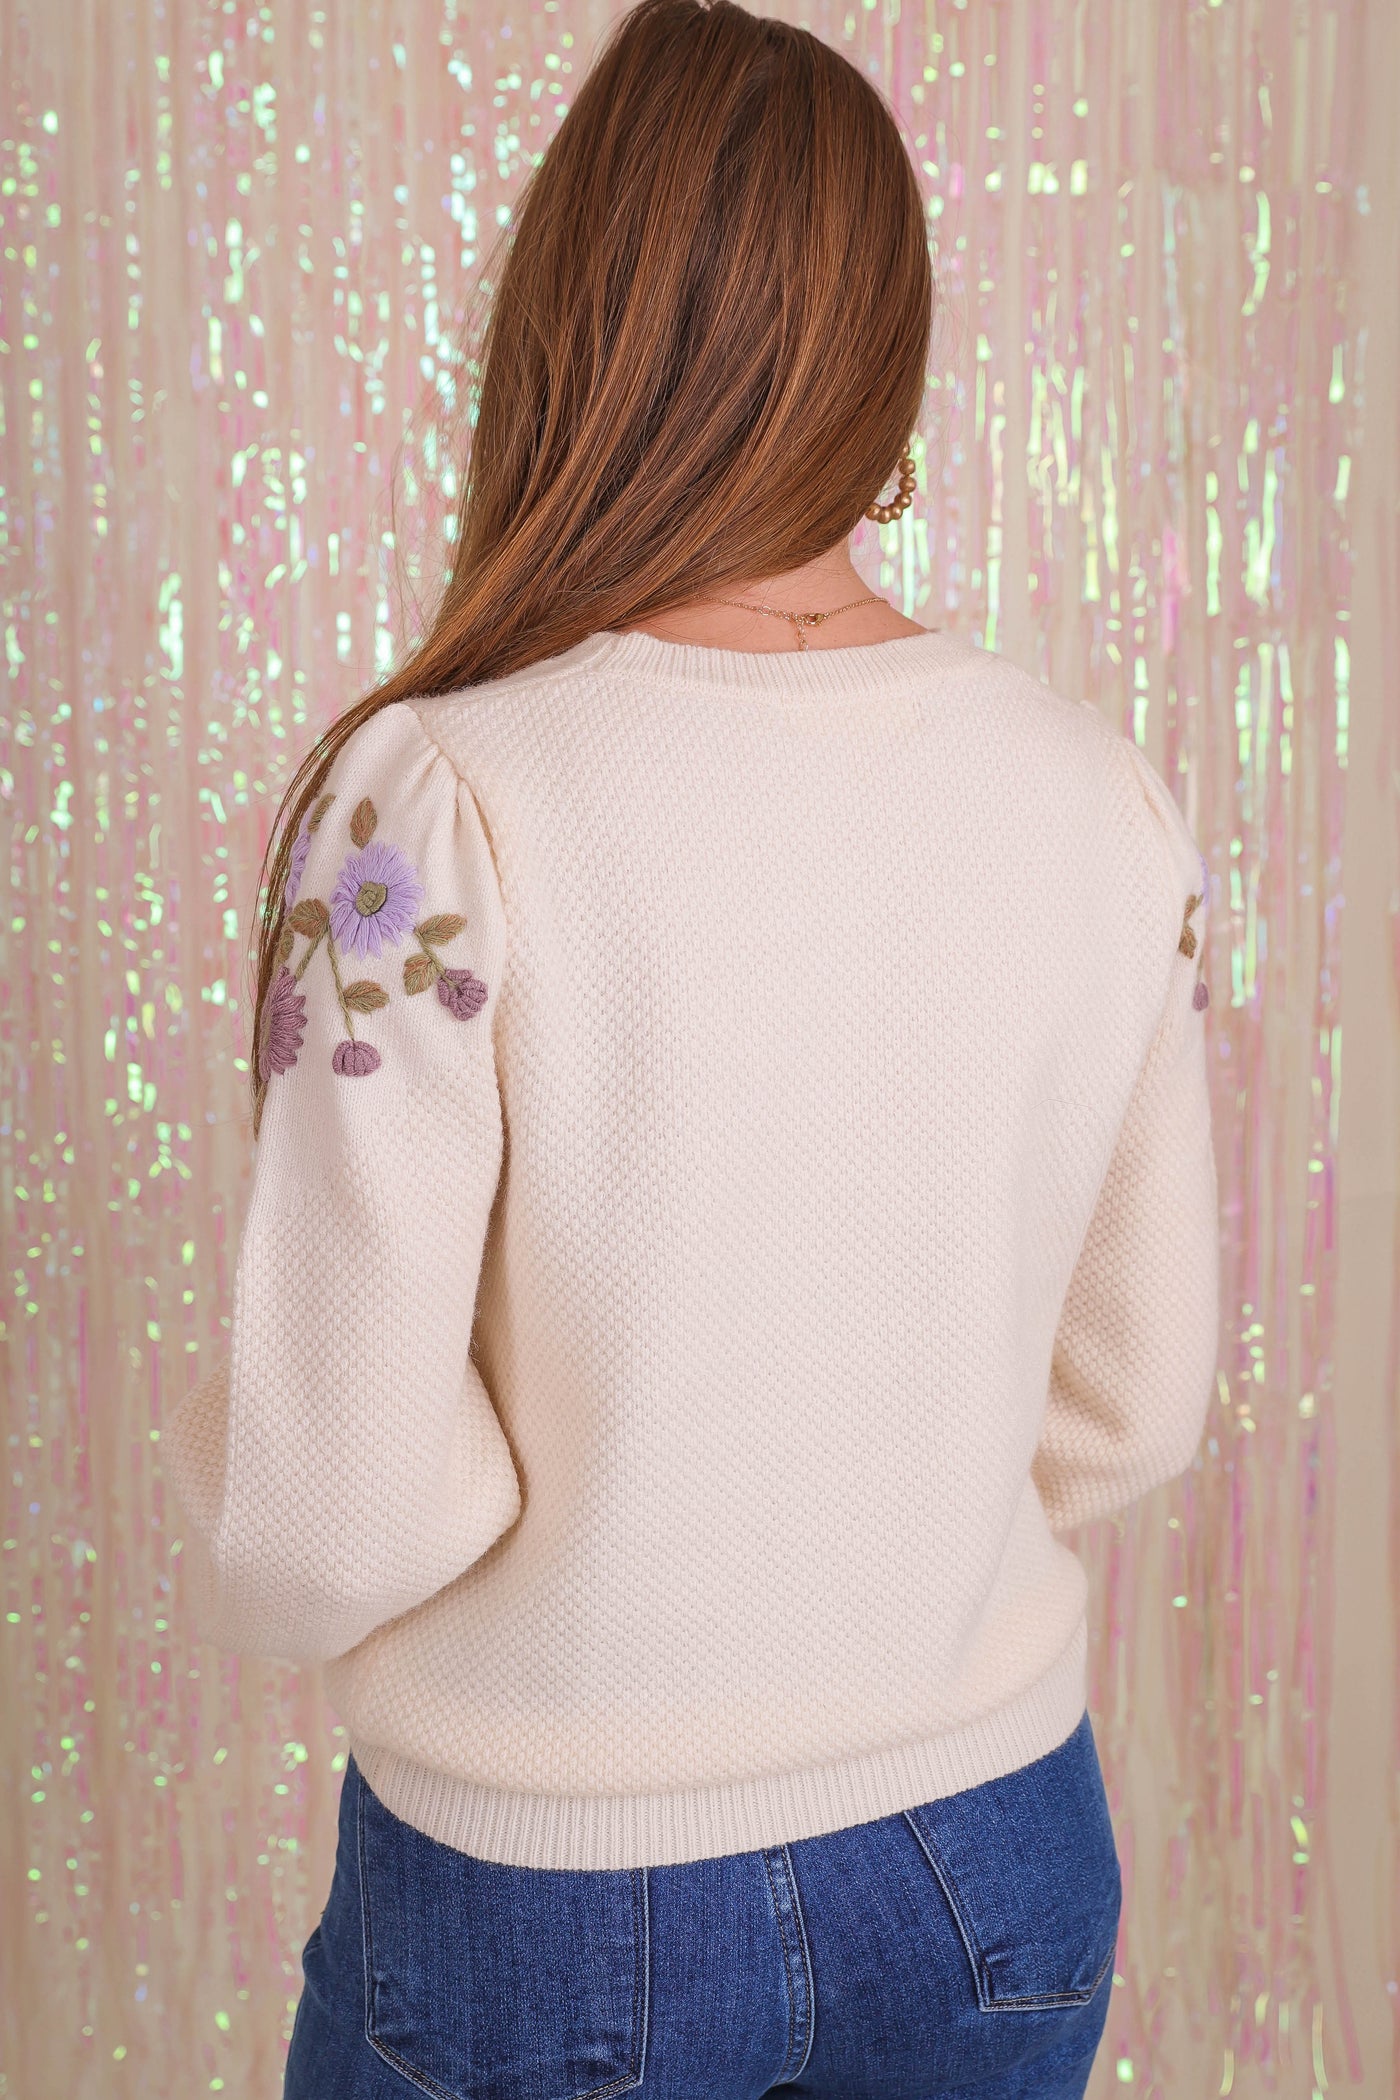 Women's Flower Embroidered Sweater- Women's Preppy Sweaters- See and Be Seen Sweater